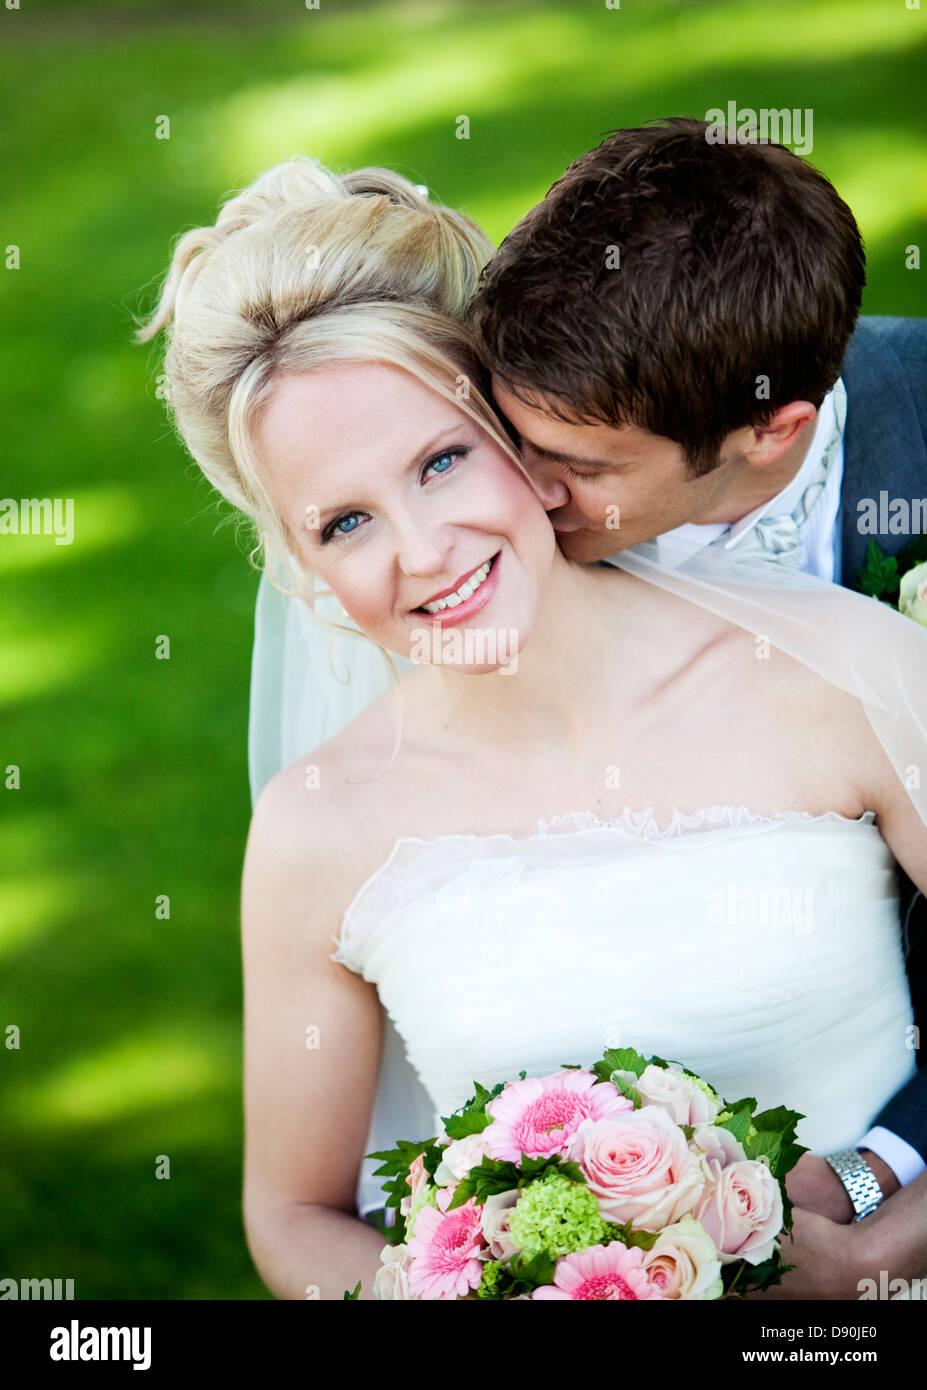 Groom embracing and kissing bride from behind Stock Photo